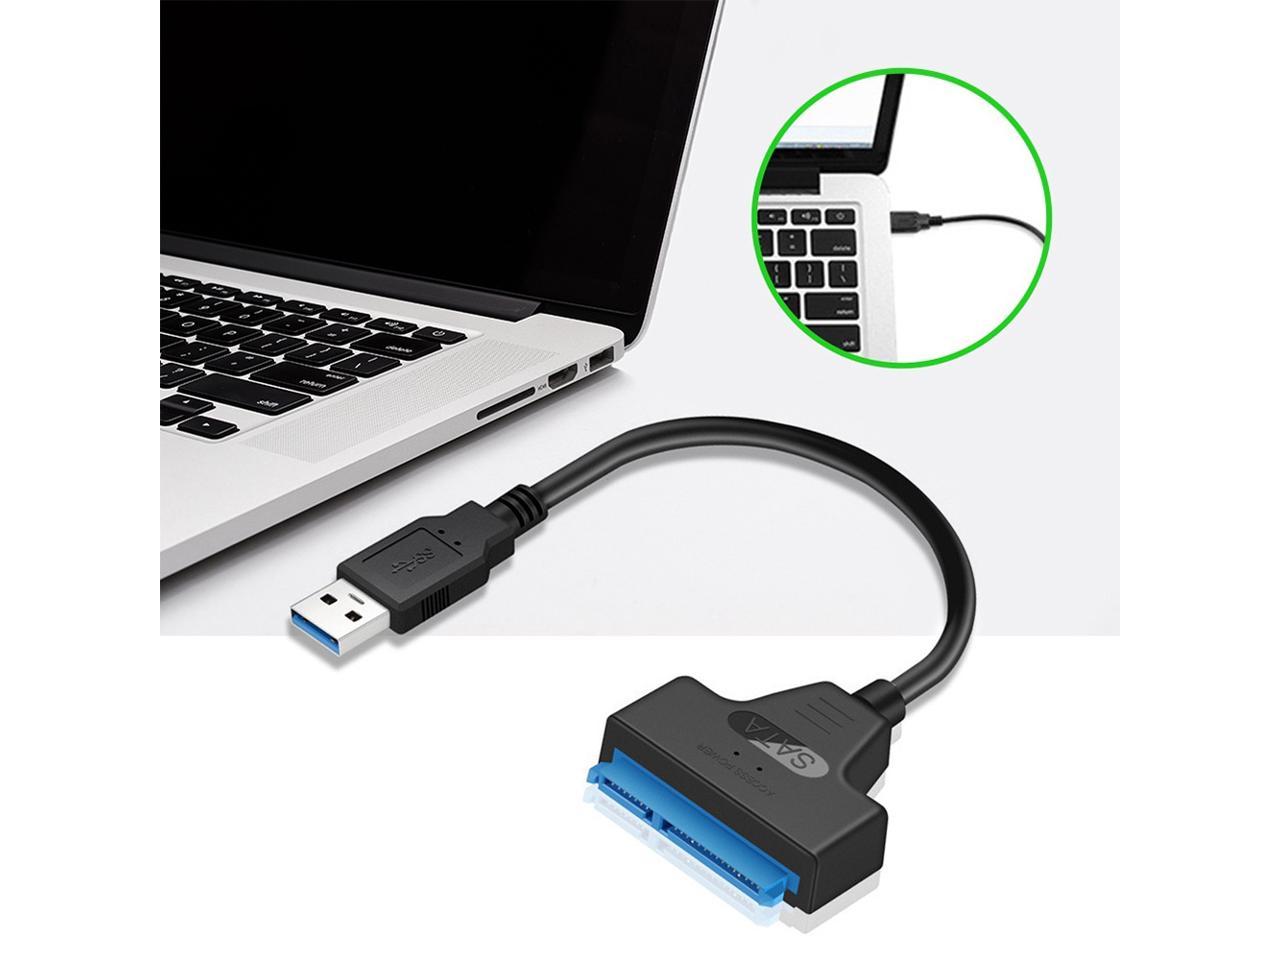 ZKxl8ca USB 2.0 to SATA 22Pin Adapter Cable Cord for 2.5 Inch HDD Laptop Hard Drive